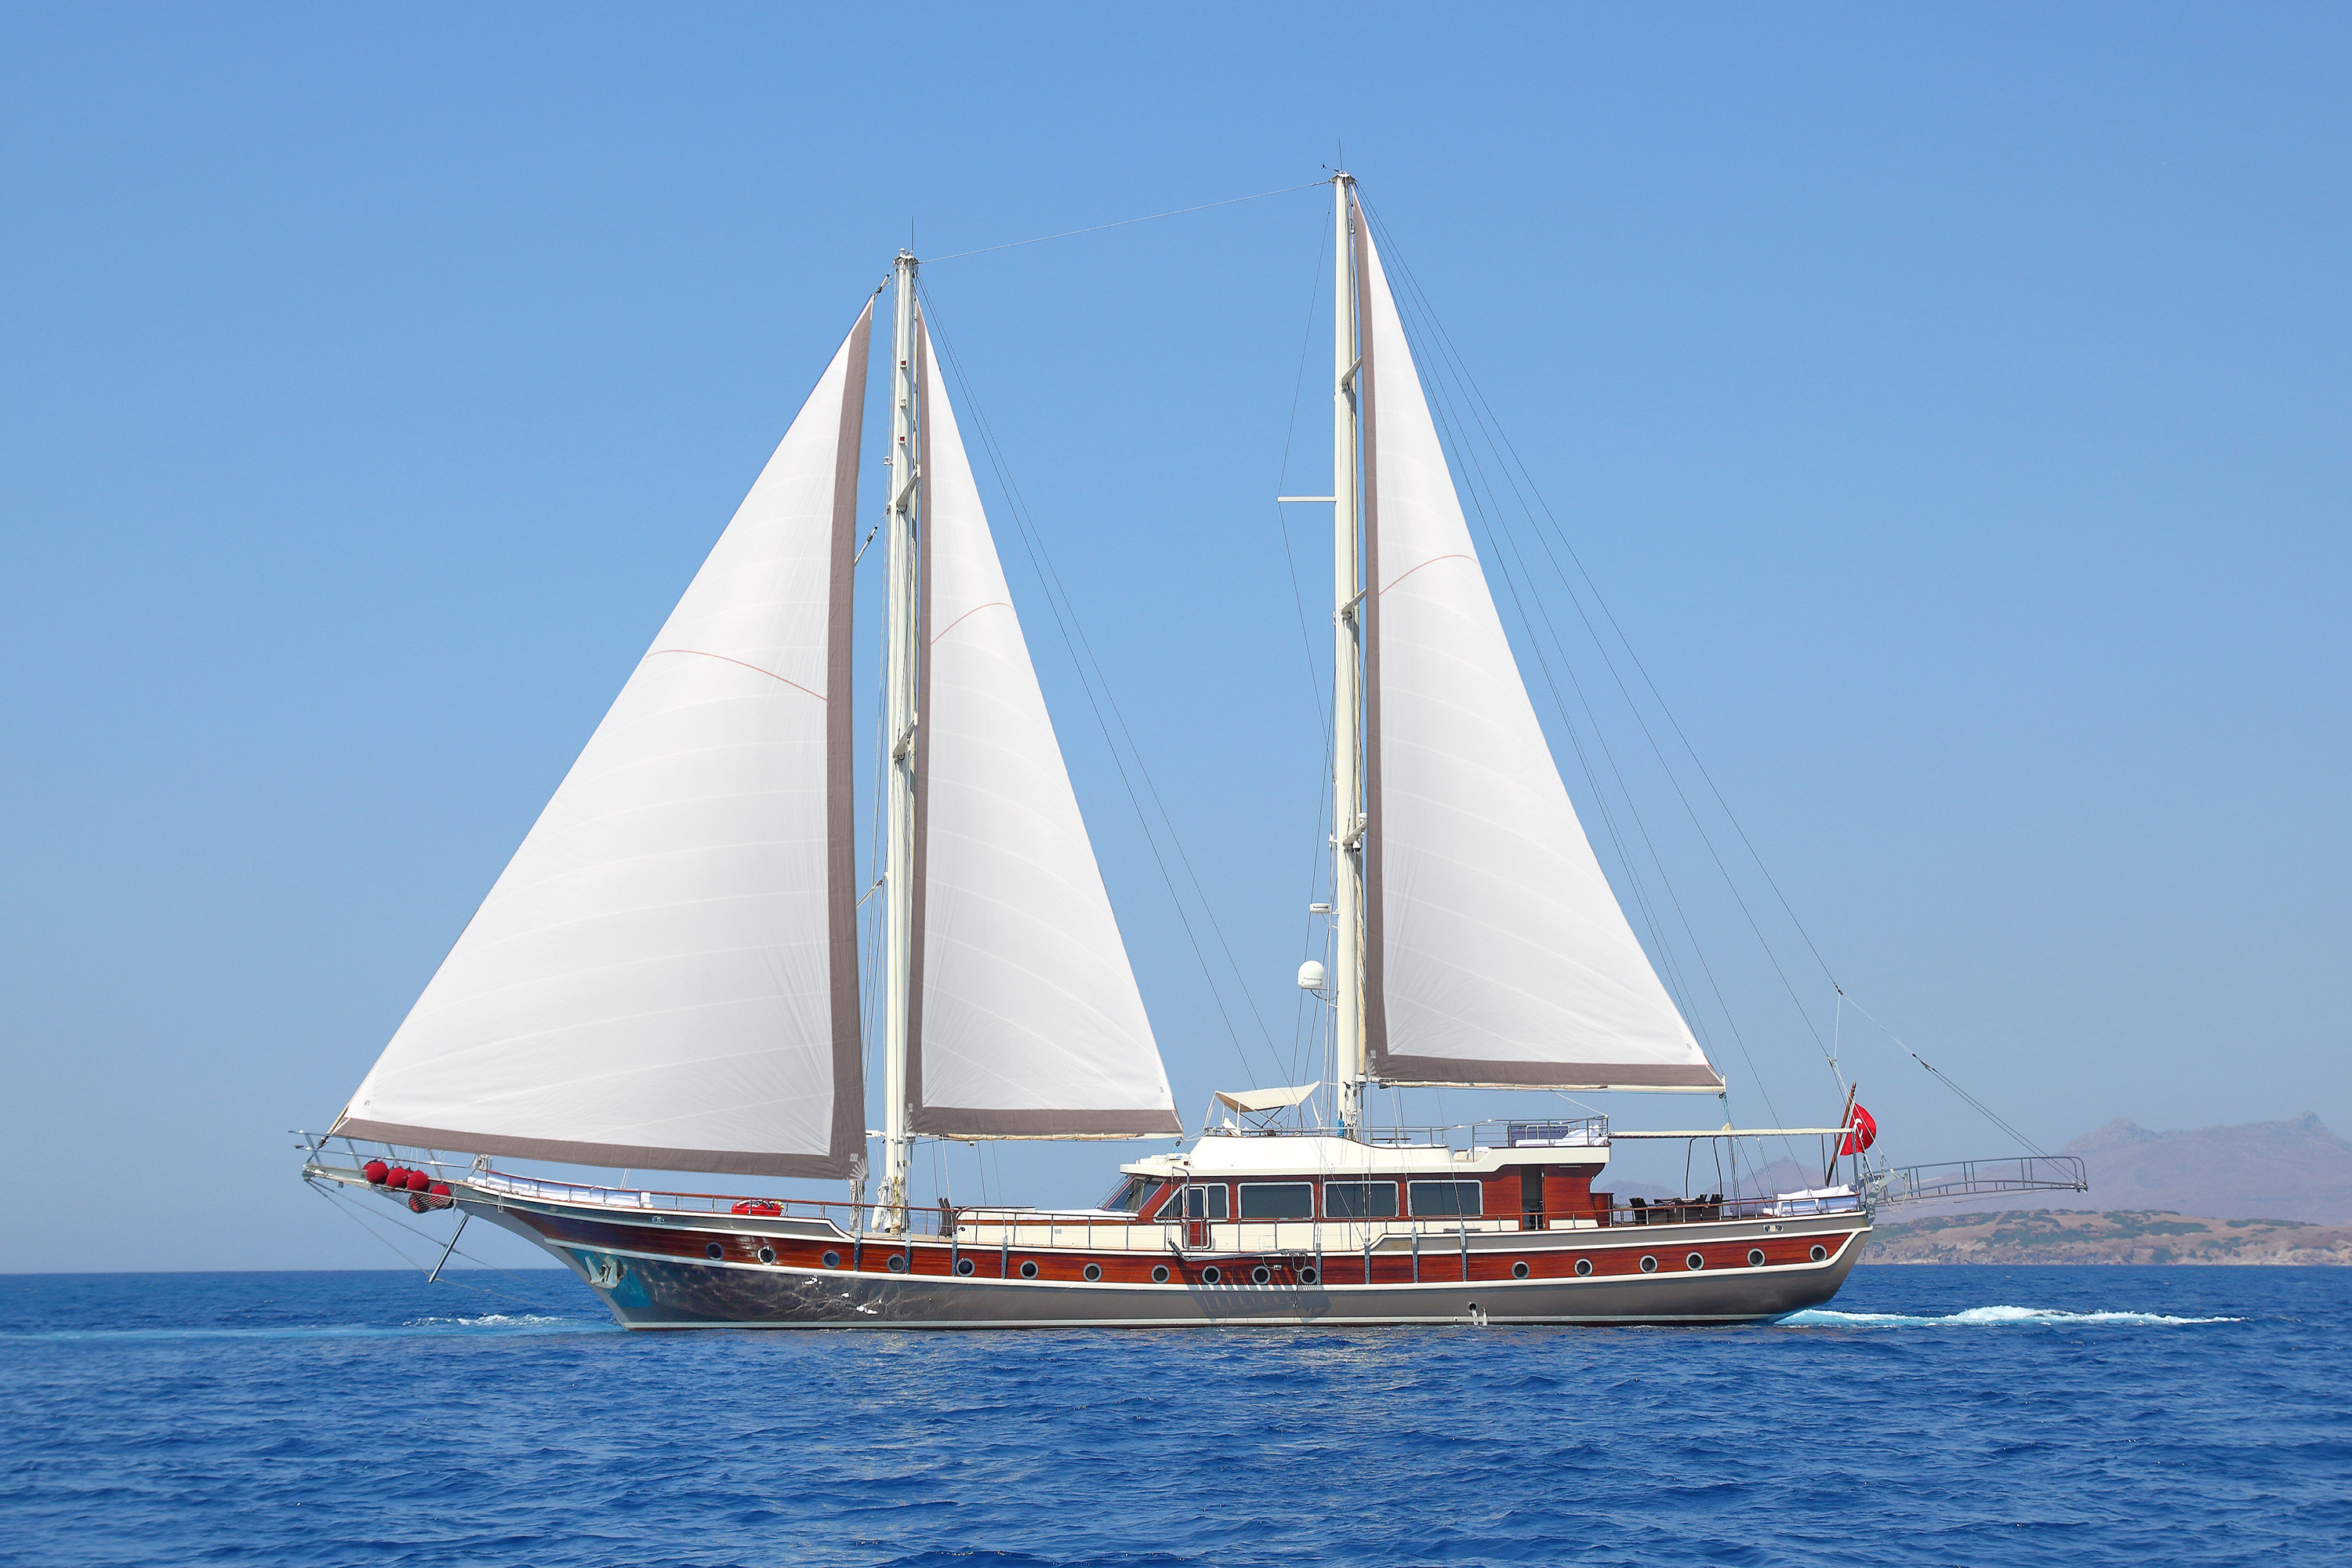 Double Eagle Yacht – May (Daily)